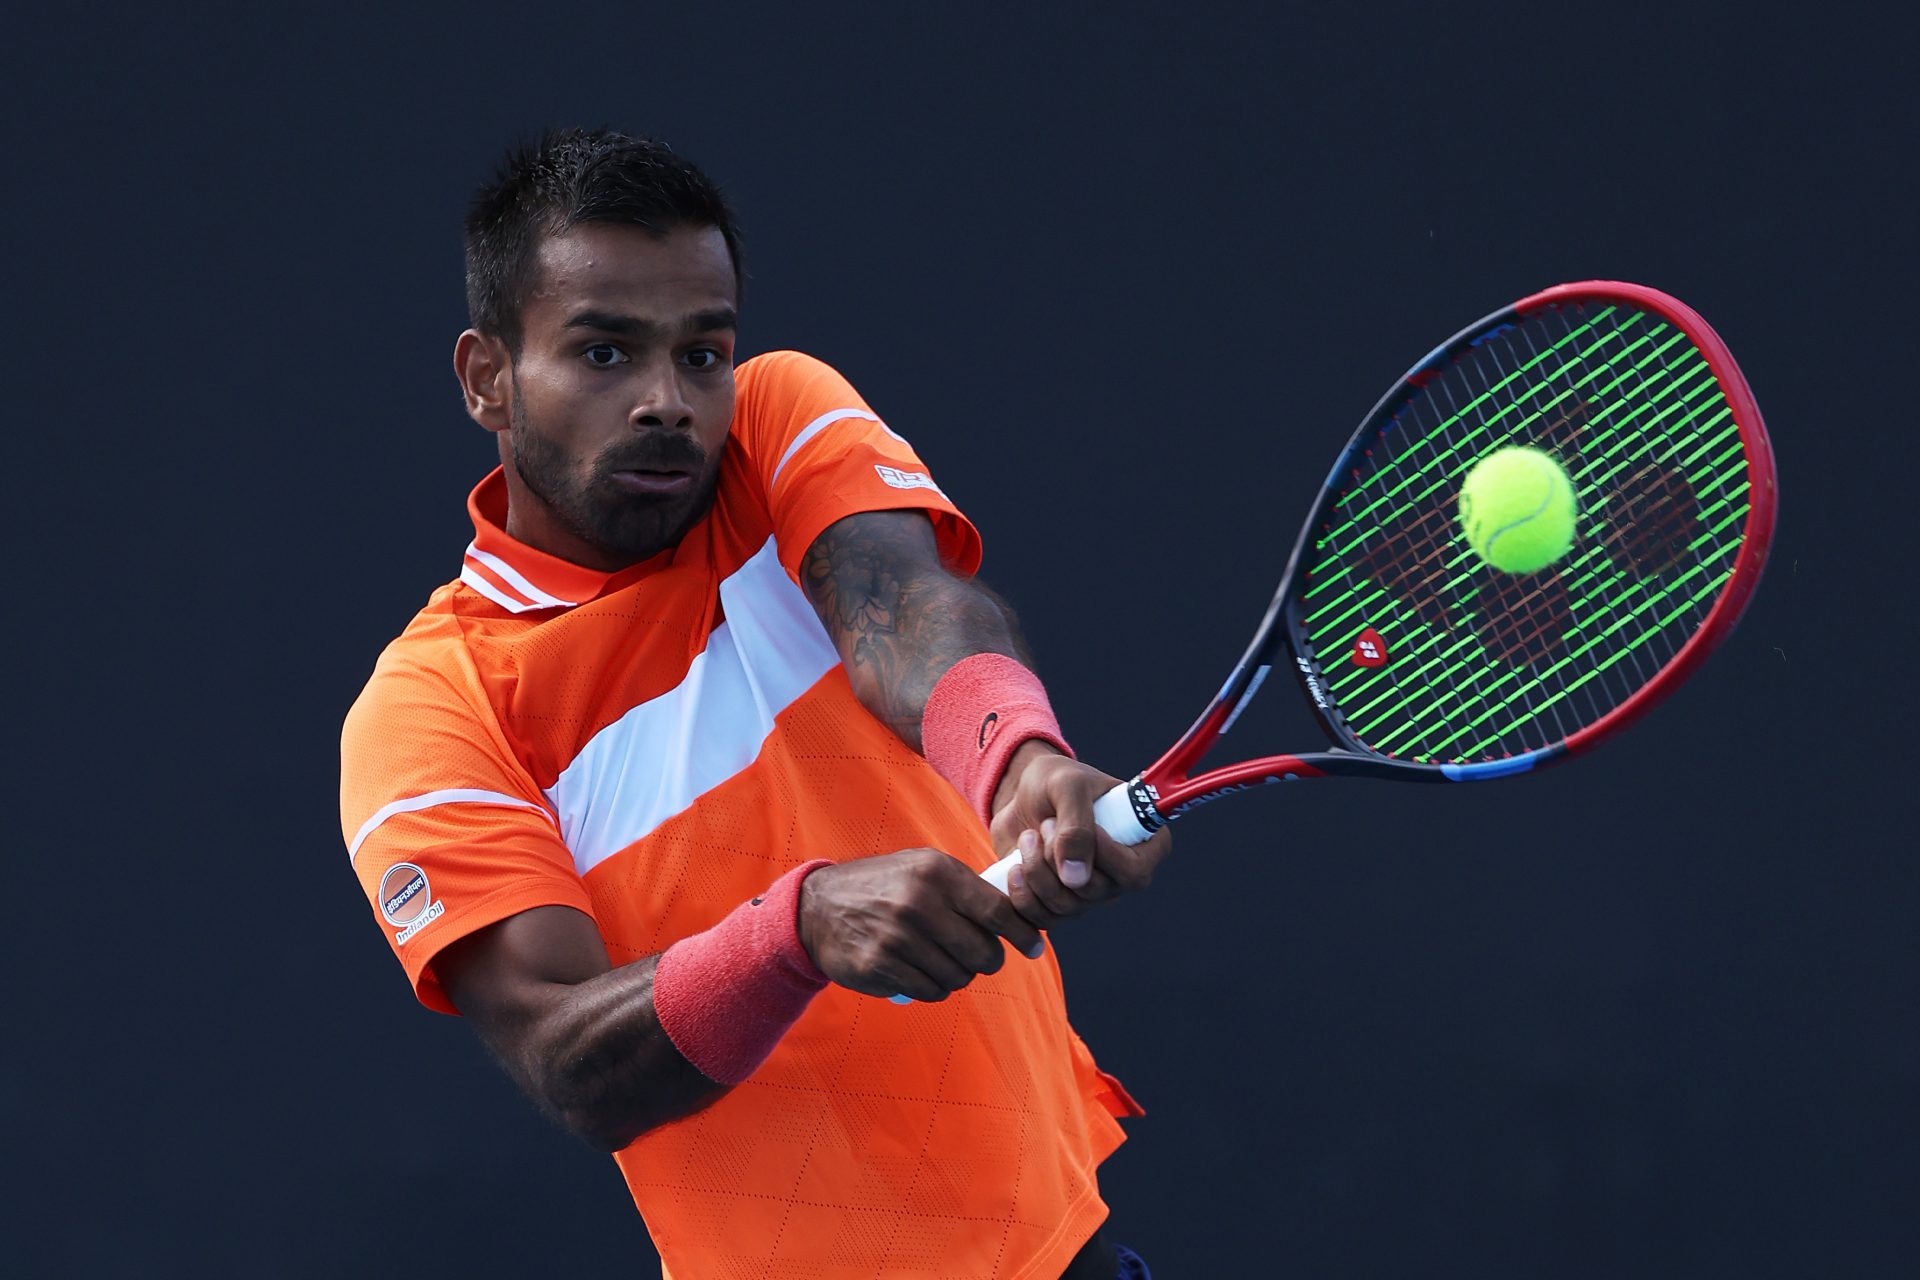 Why Indian player Sumit Nagal will leave the Australian Open 13x richer after just one round